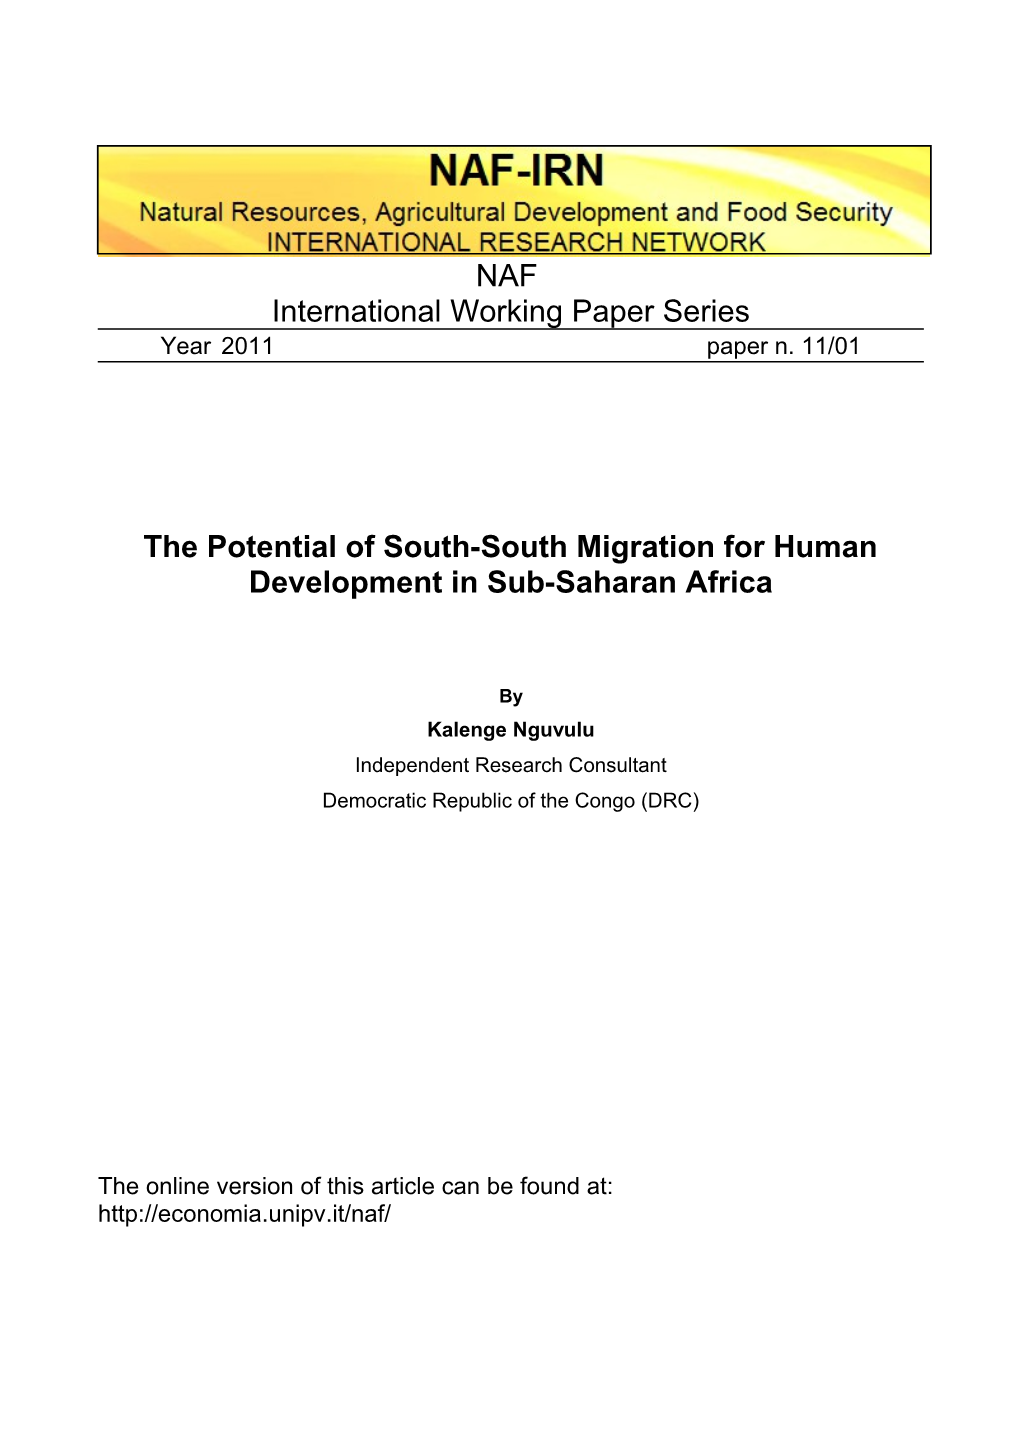 The Potential of South-South Migration for Human Development in Sub-Saharan Africa